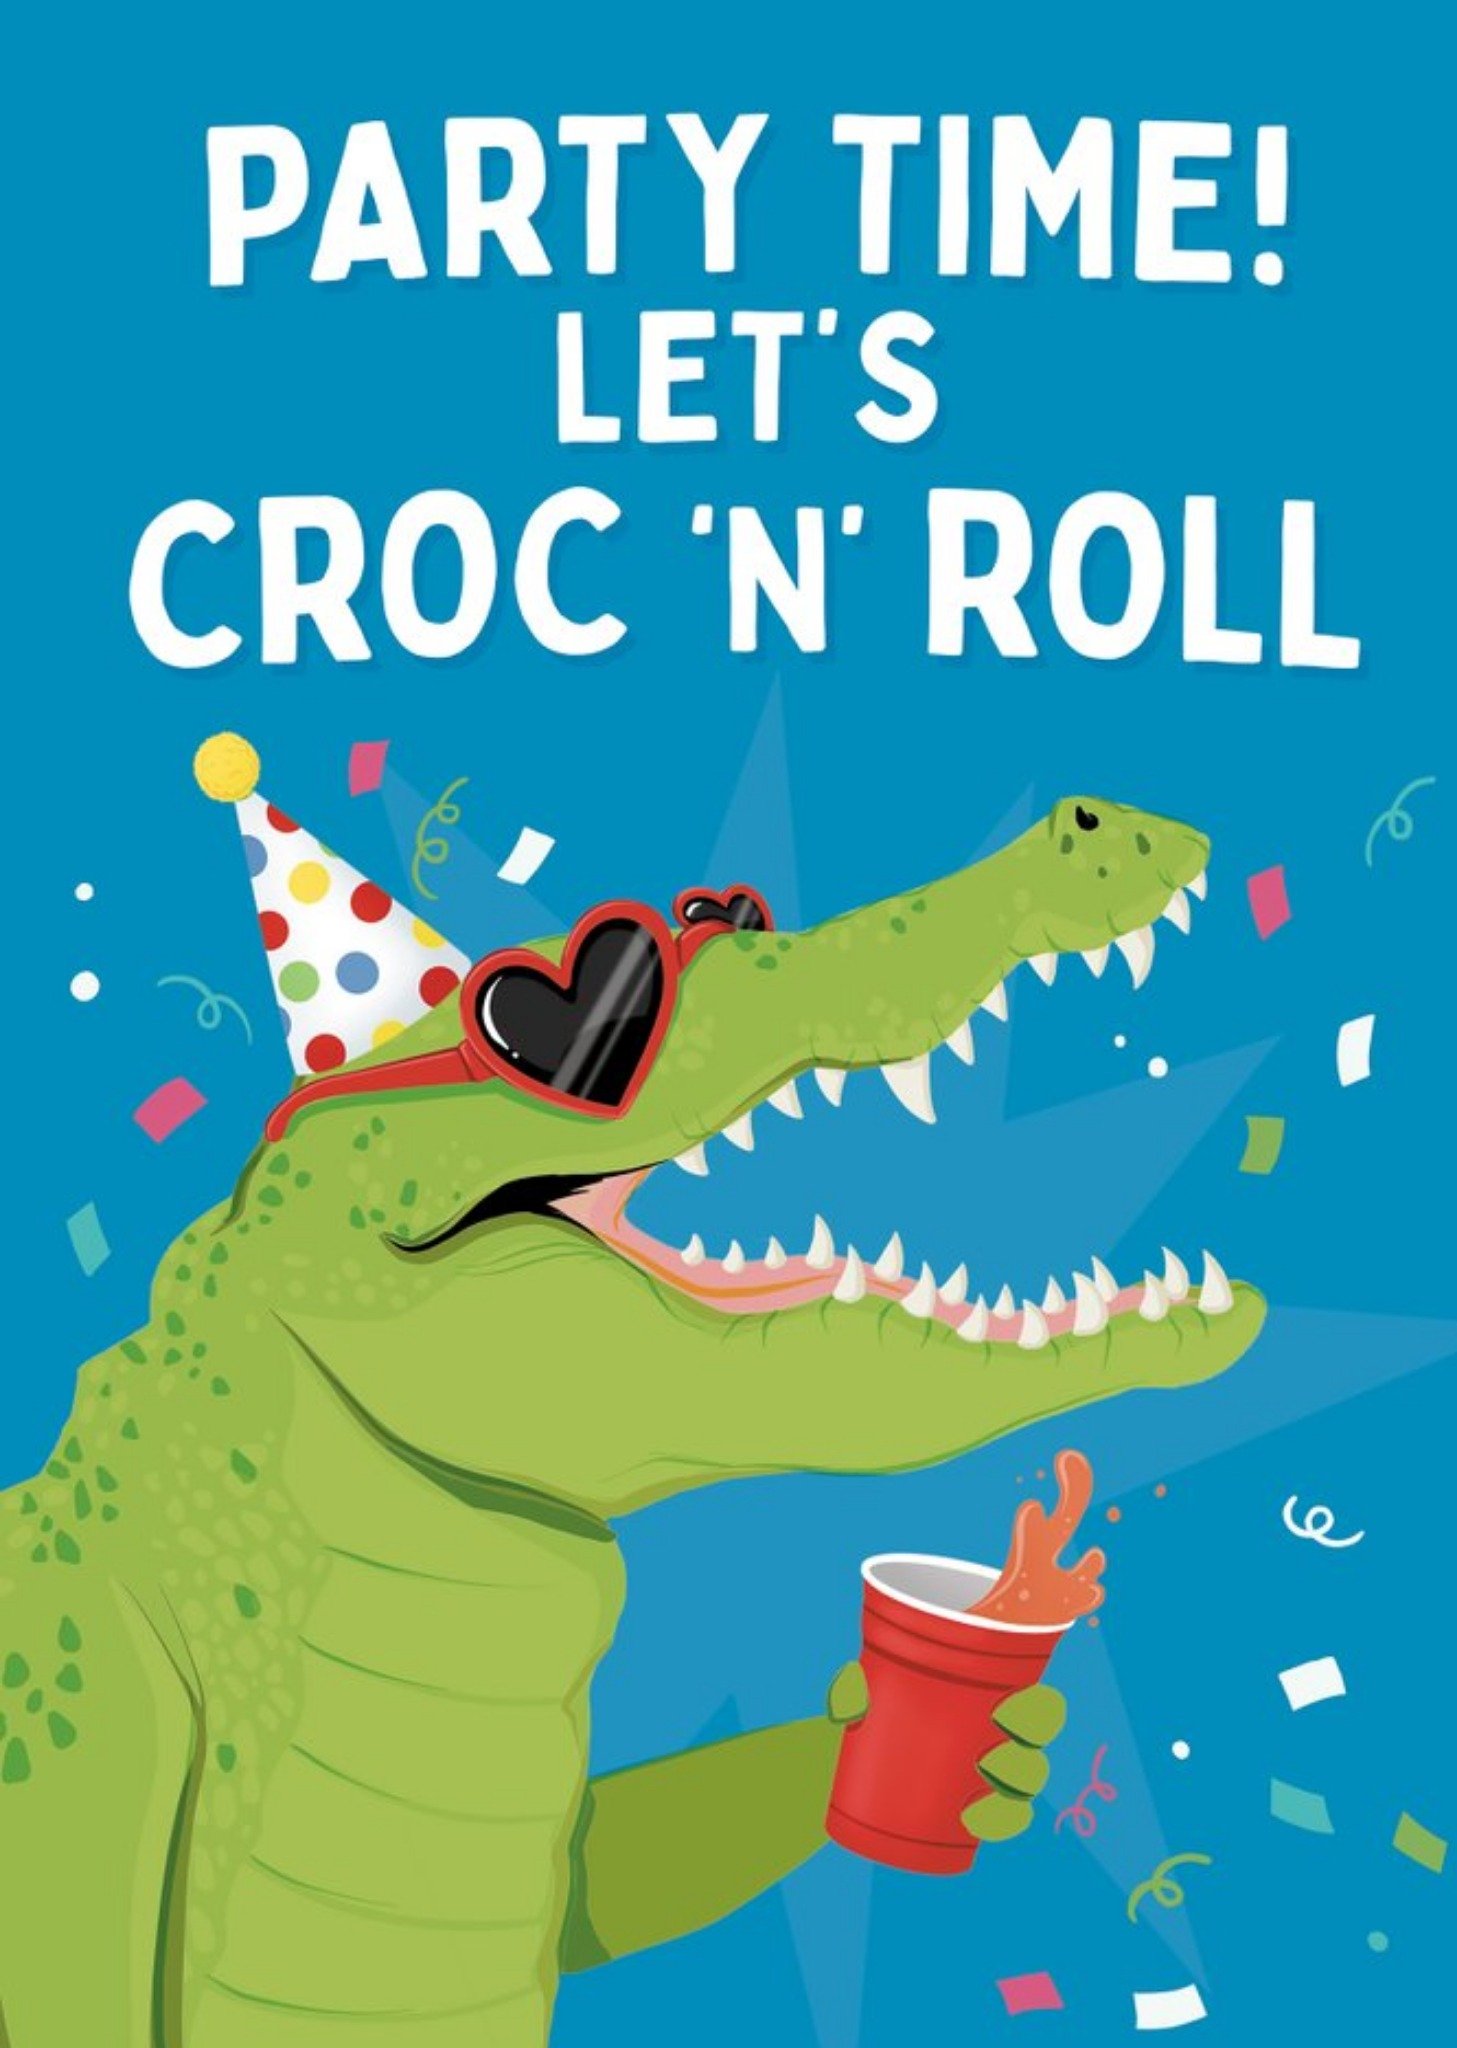 Moonpig Illustration Of A Cool Crocodile Partying Funny Pun Birthday Card, Large